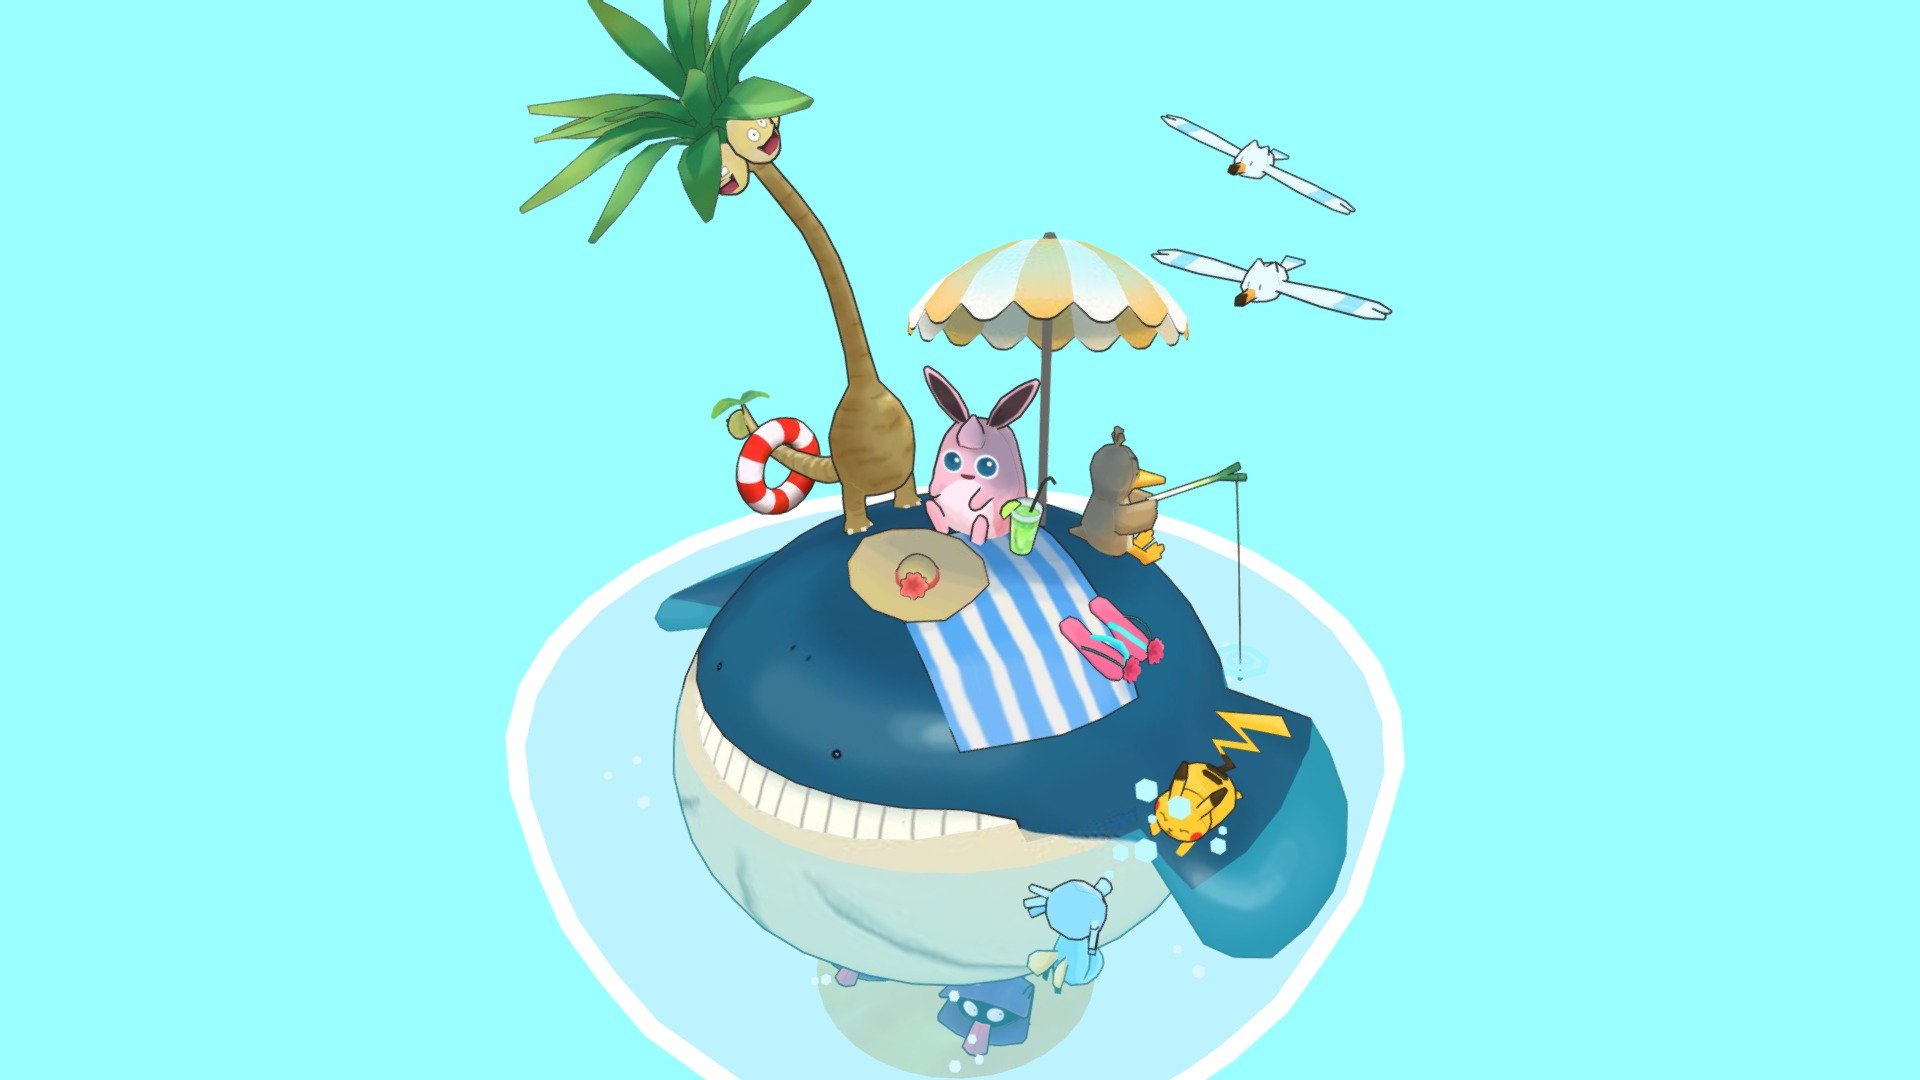 How would you spend your summer vacation if your pokemon can take you somewhere nice? - vacation on an island? - 3D model by Akiko.Tomiyoshi 3d model